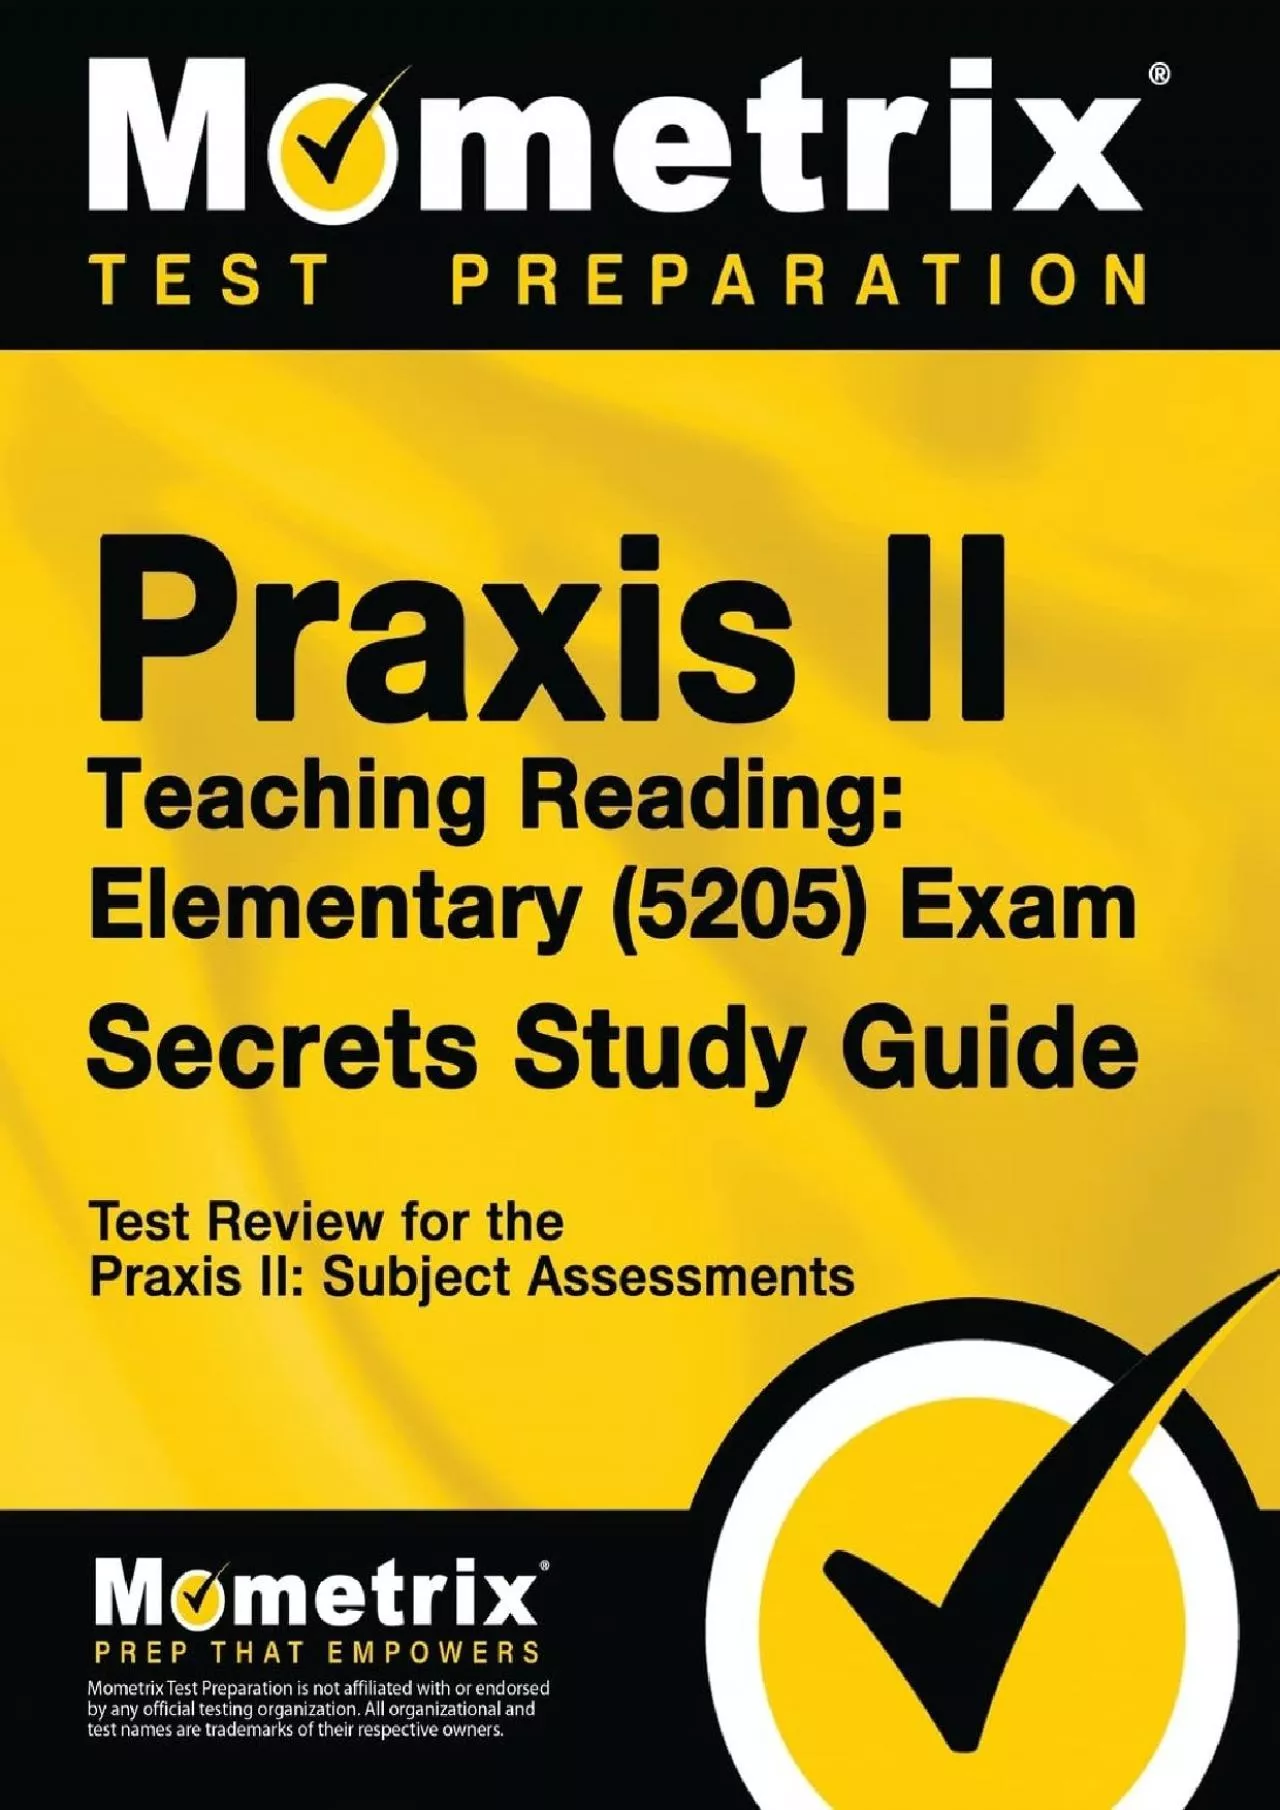 [DOWNLOAD] Praxis Teaching Reading - Elementary 5205 Secrets Study Guide: Test Review